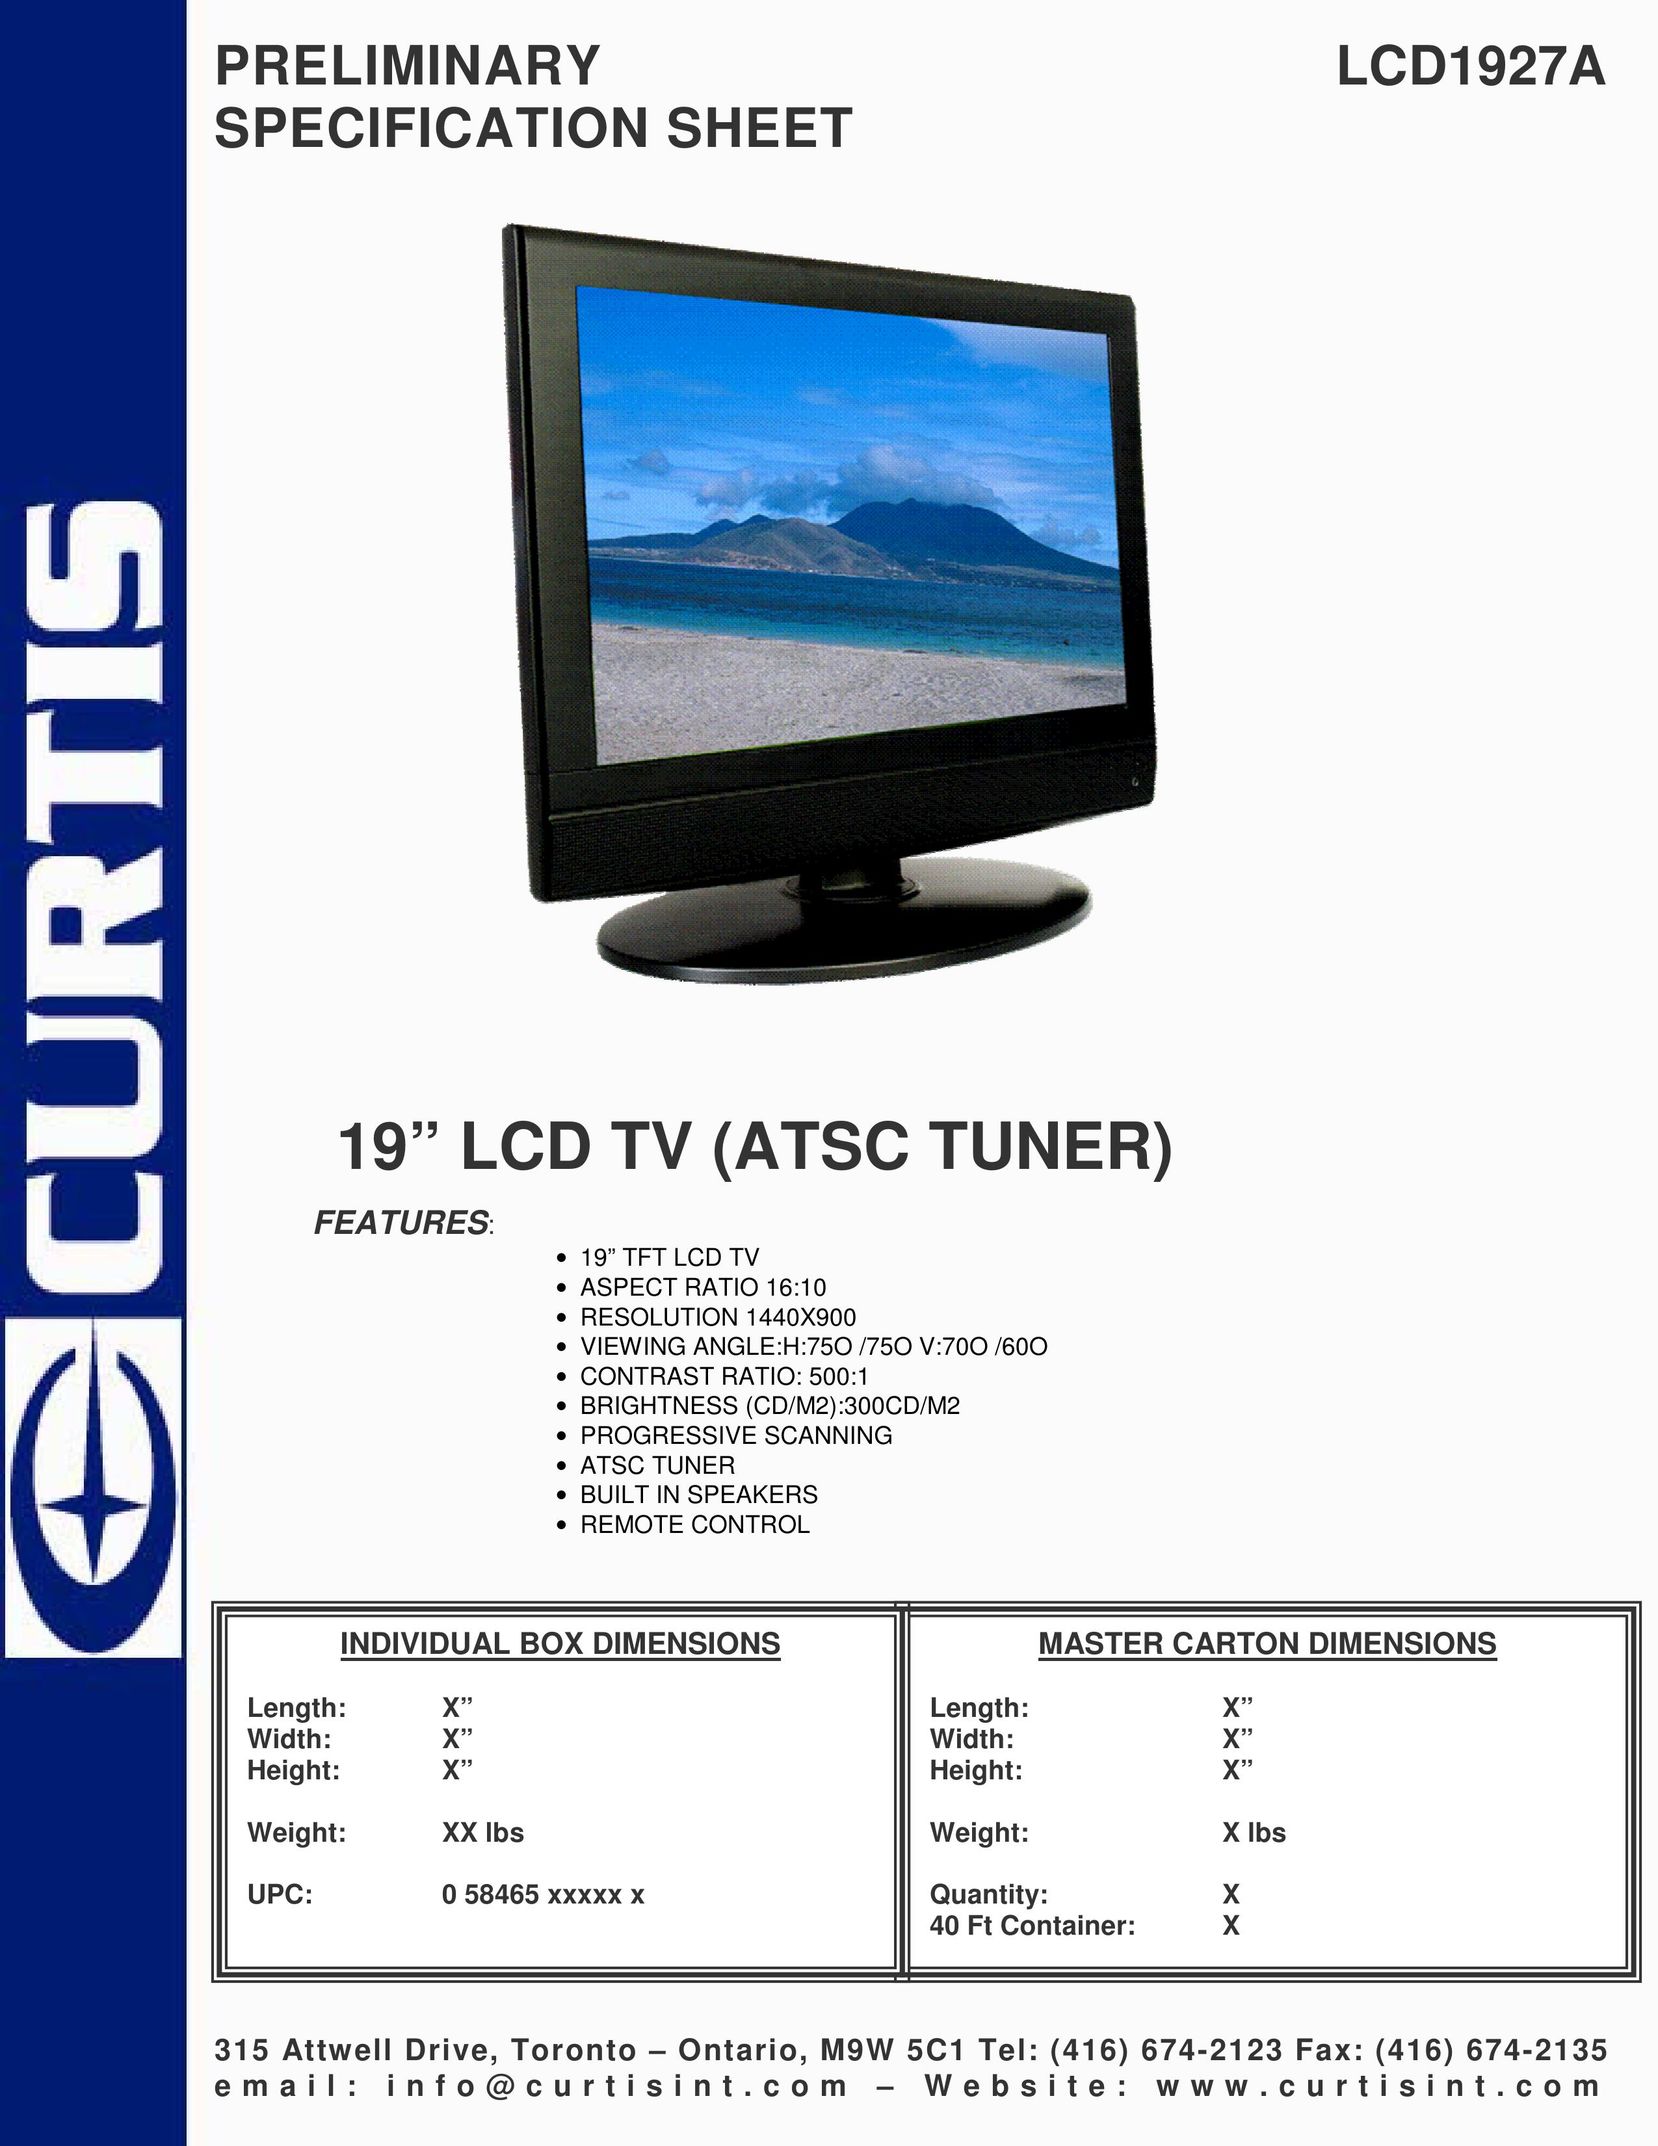 Curtis LCD1927A Flat Panel Television User Manual